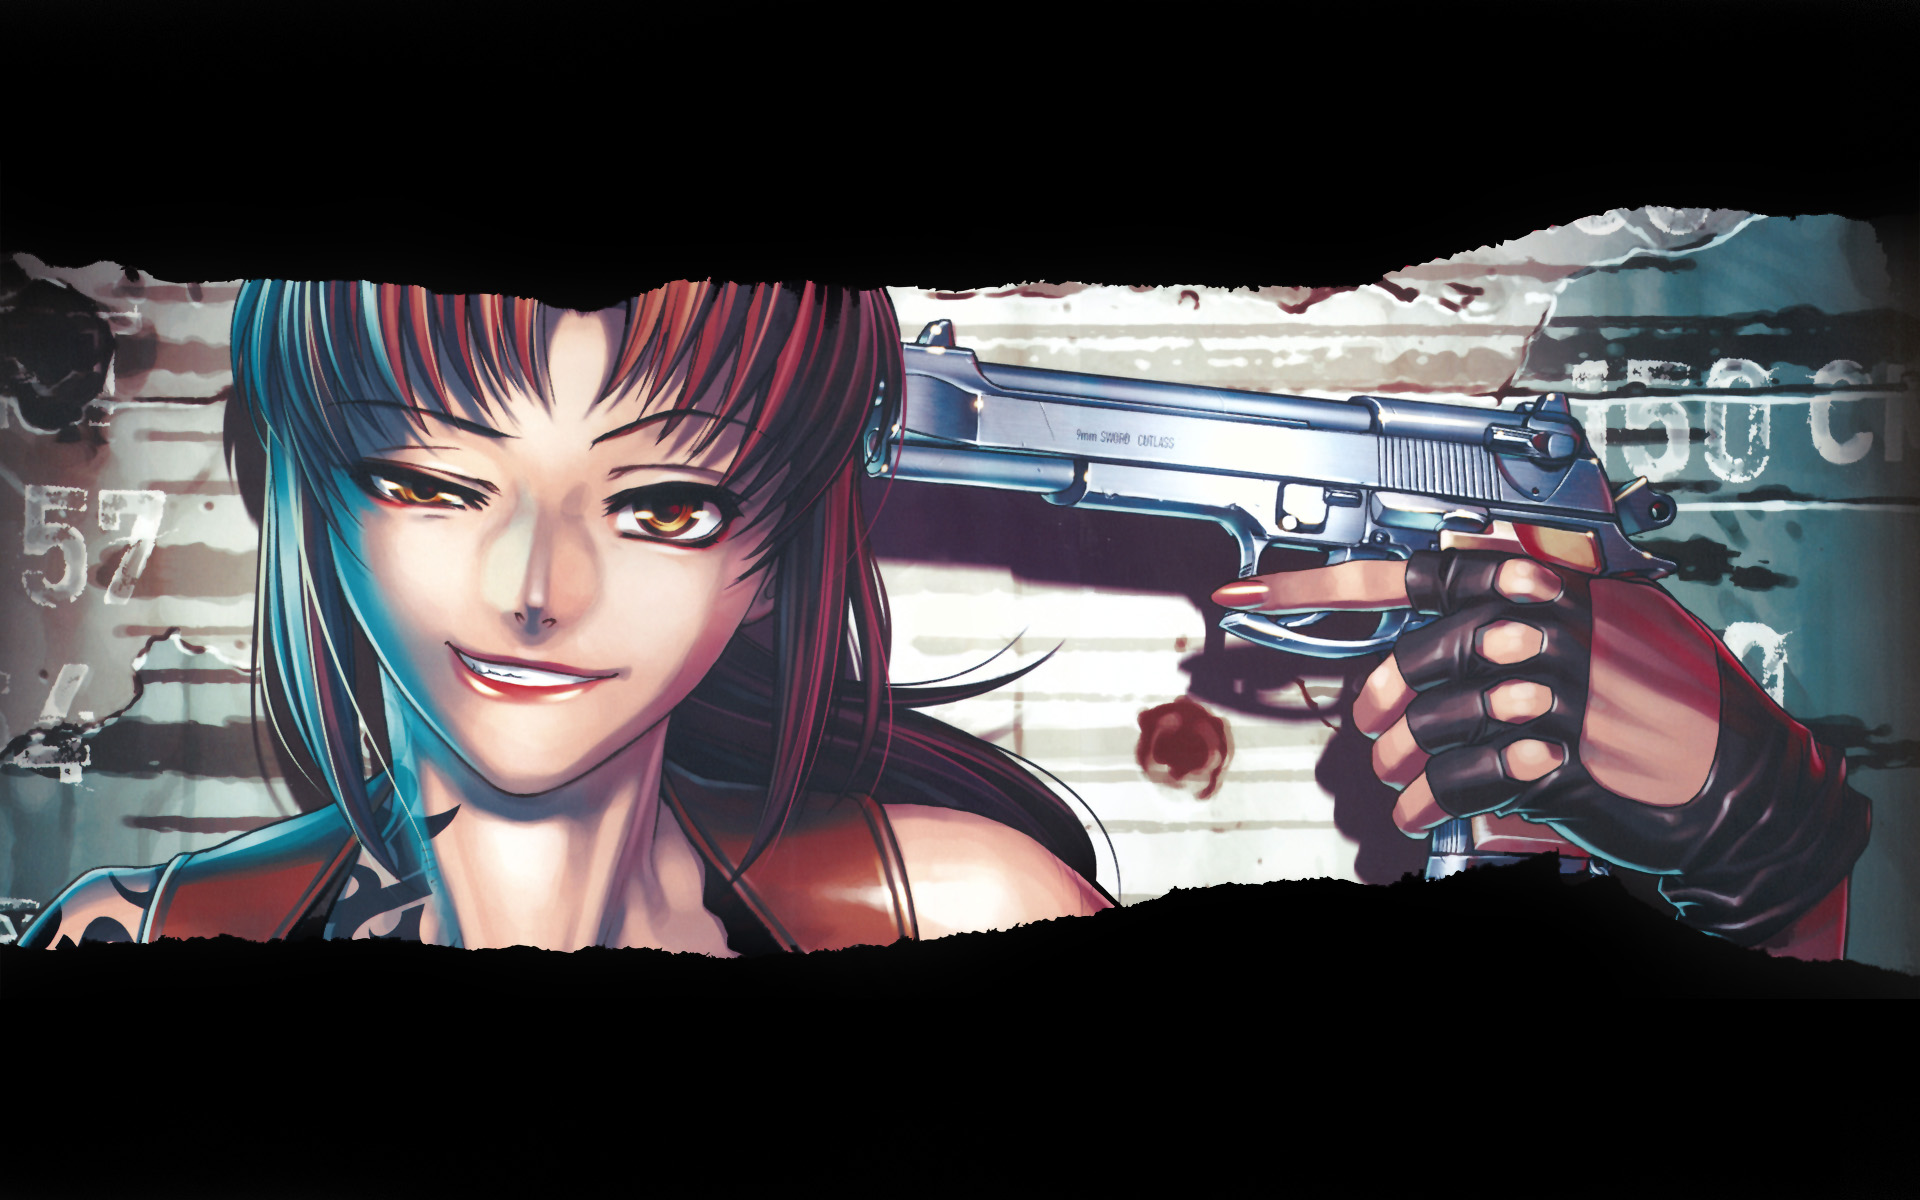 Revy from Black Lagoon in a black lagoon